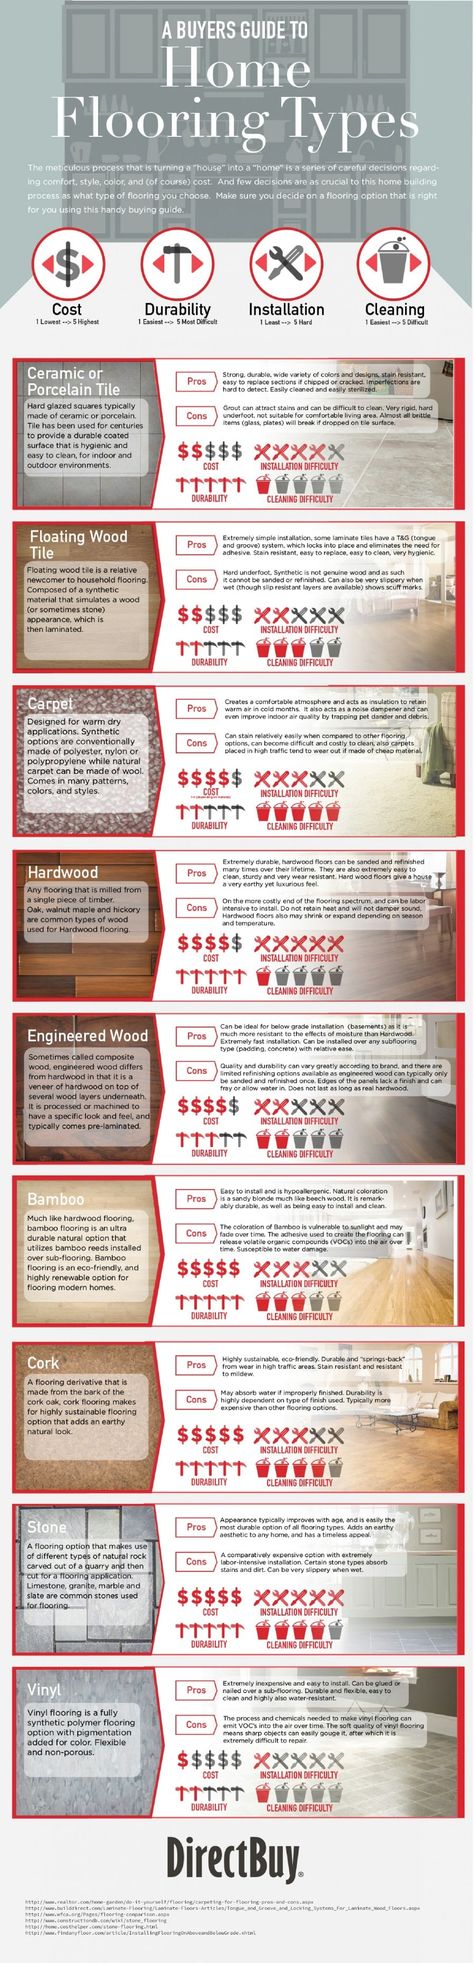 21. What type of flooring is best for your home? - 50 Amazingly Clever Cheat Sheets To Simplify Home Decorating Projects Home Repairs, Exterior, Interior, Types Of Flooring, Flooring Types, Flooring Options, Flooring, Kitchen Flooring, Home Remodeling